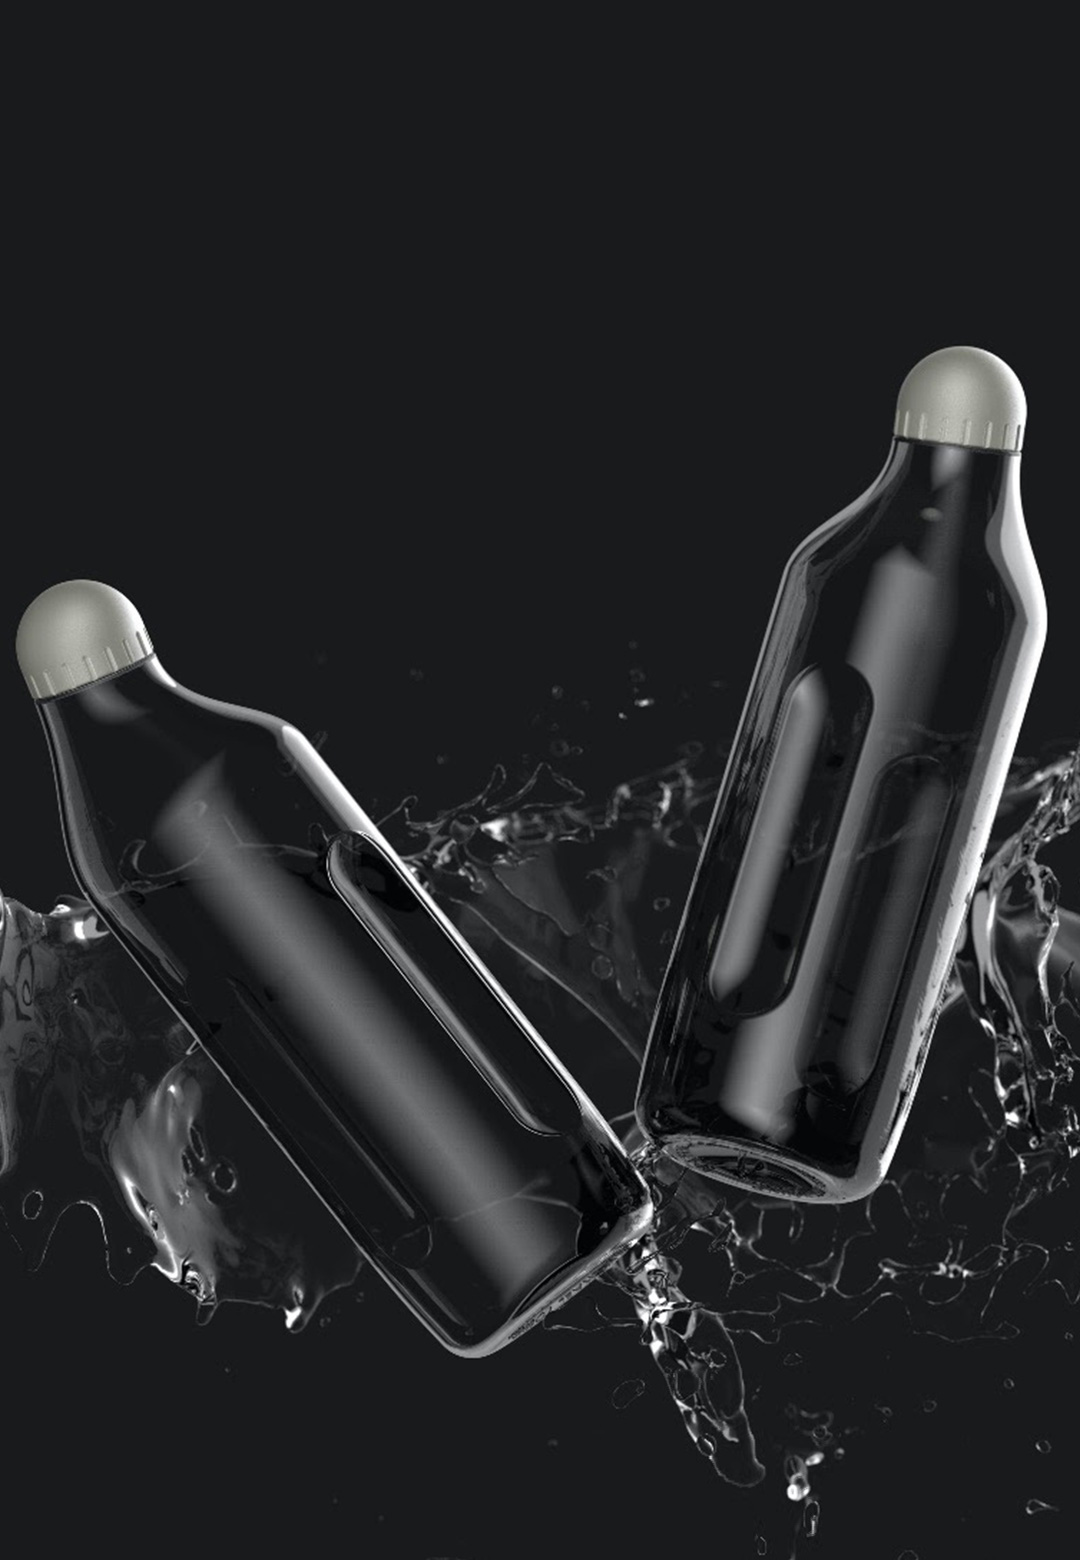 Michael Young creates a water bottle you can interact with